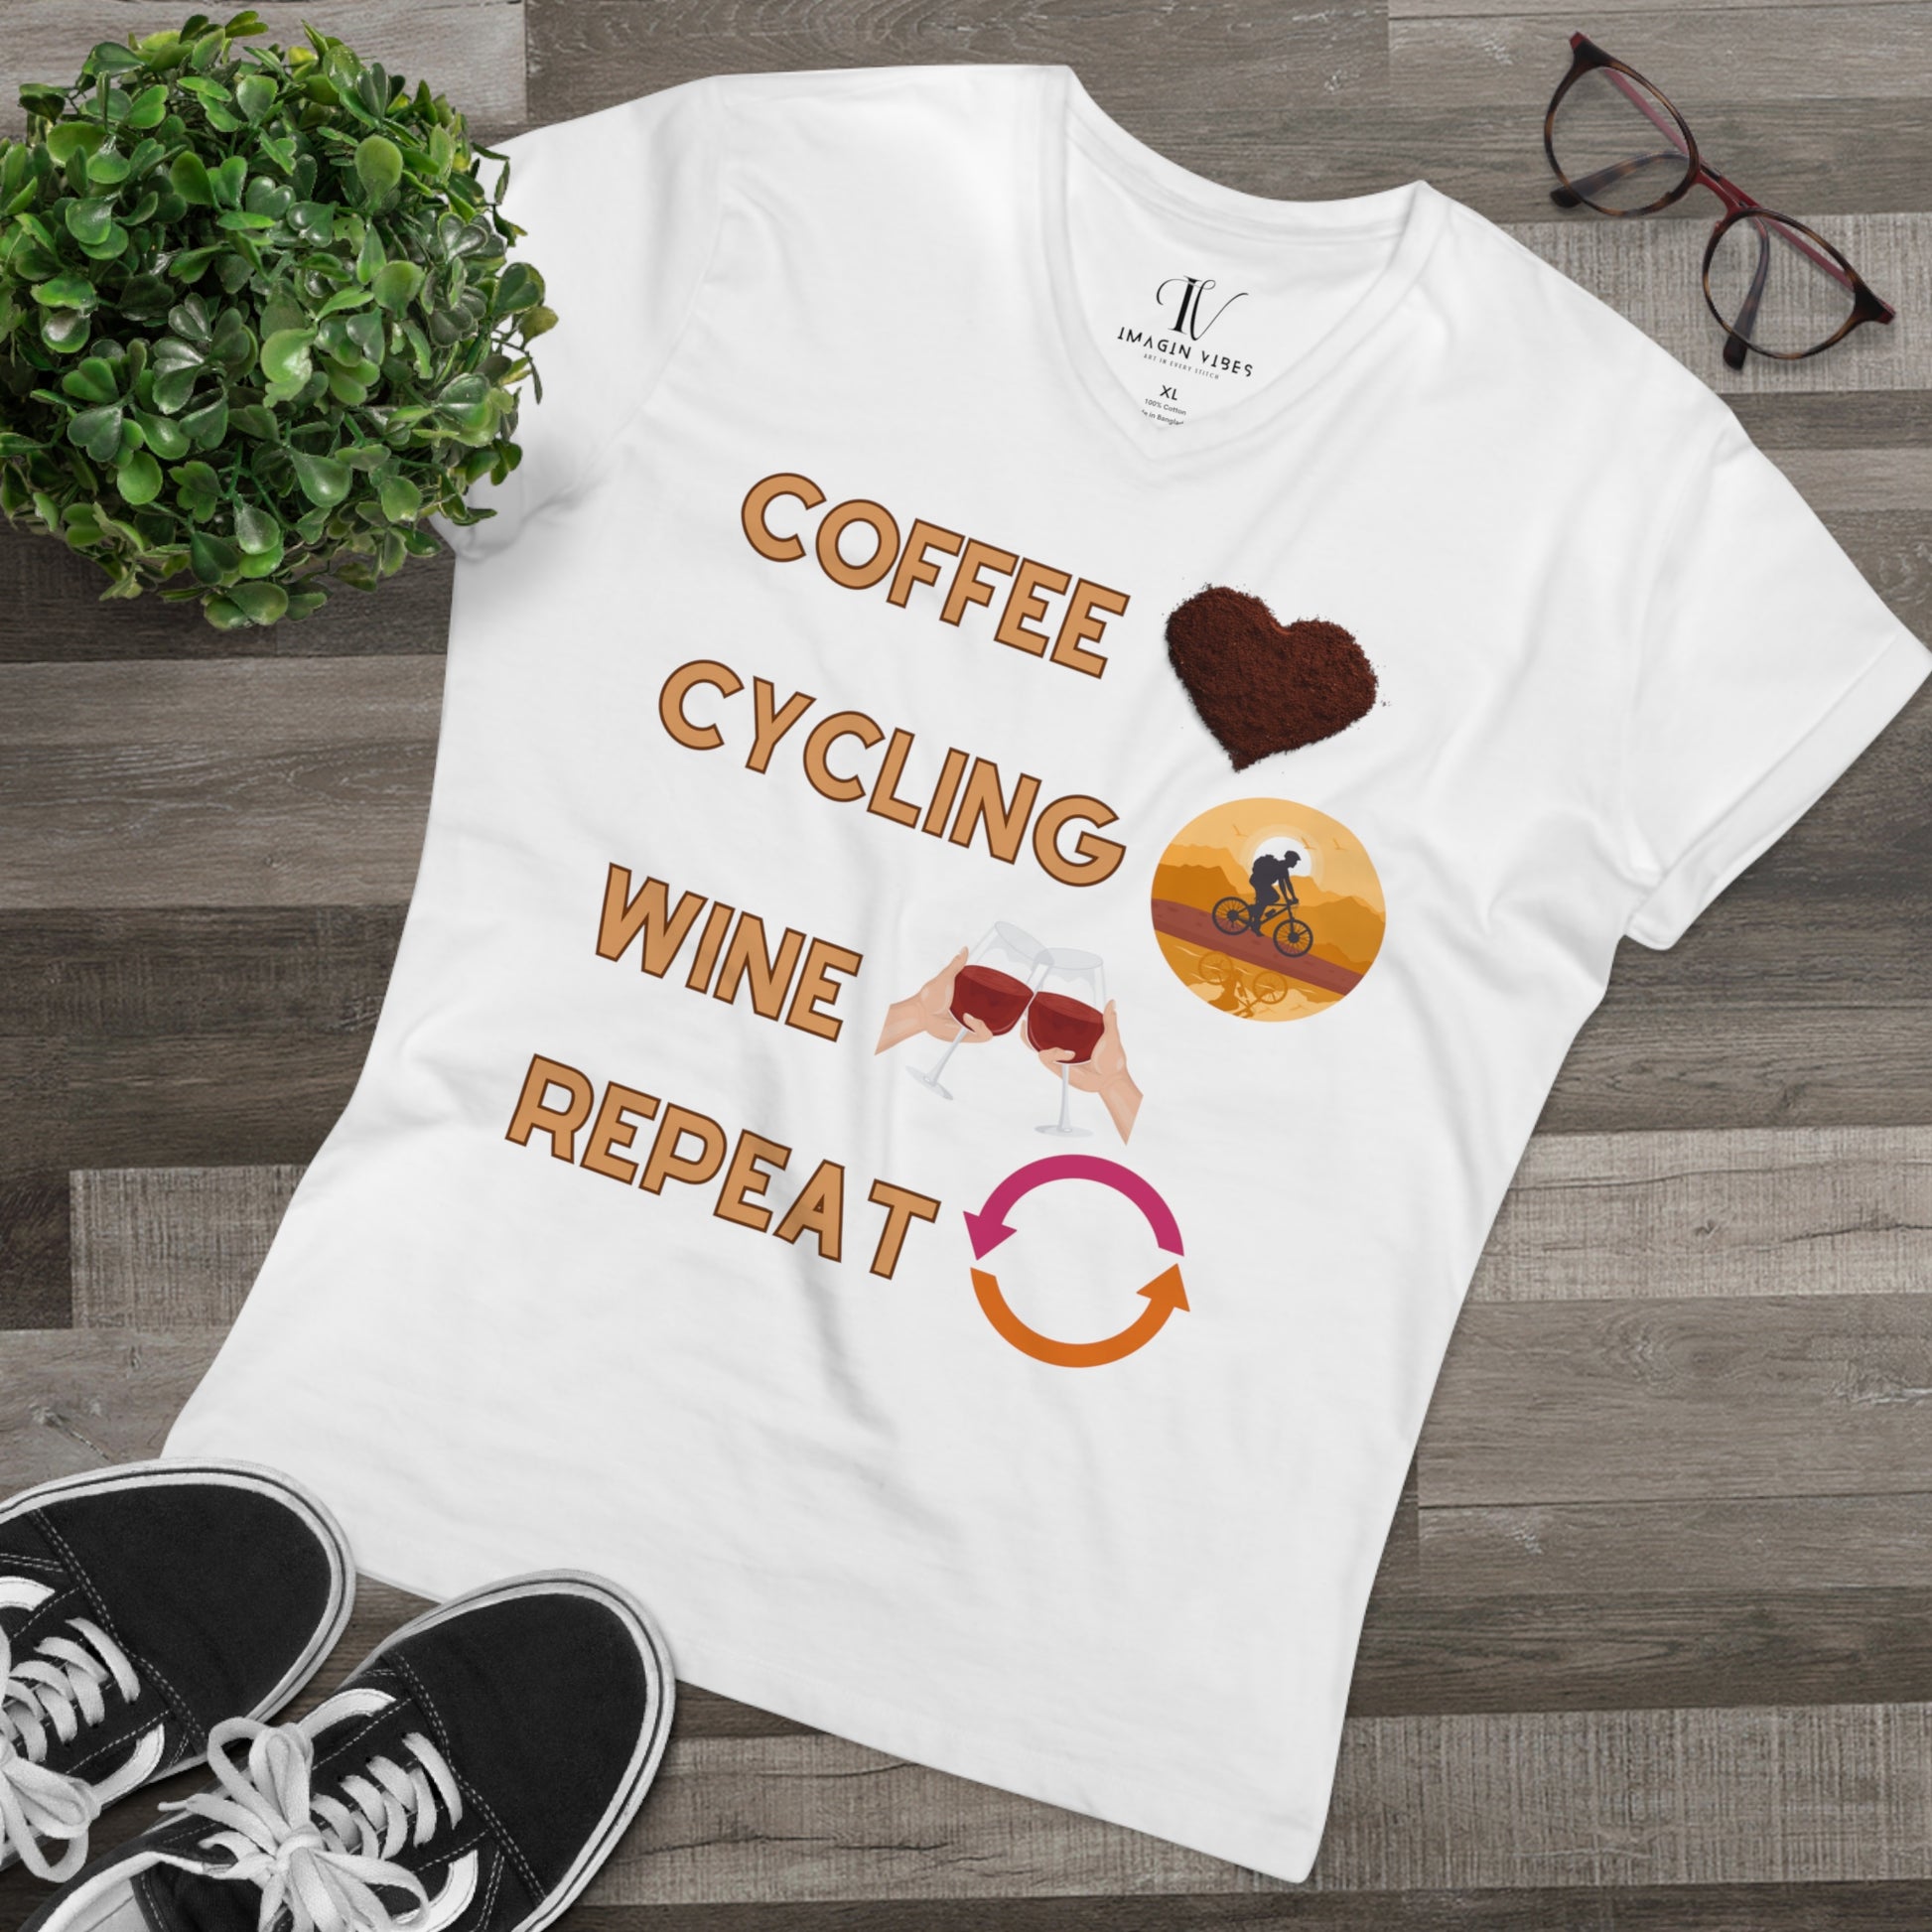 Minimalistic Bicycle T-Shirt for Men - Cotton Shirts, Eco-Friendly Gift for Coffee and Cycling Enthusiasts V-neck White XL 